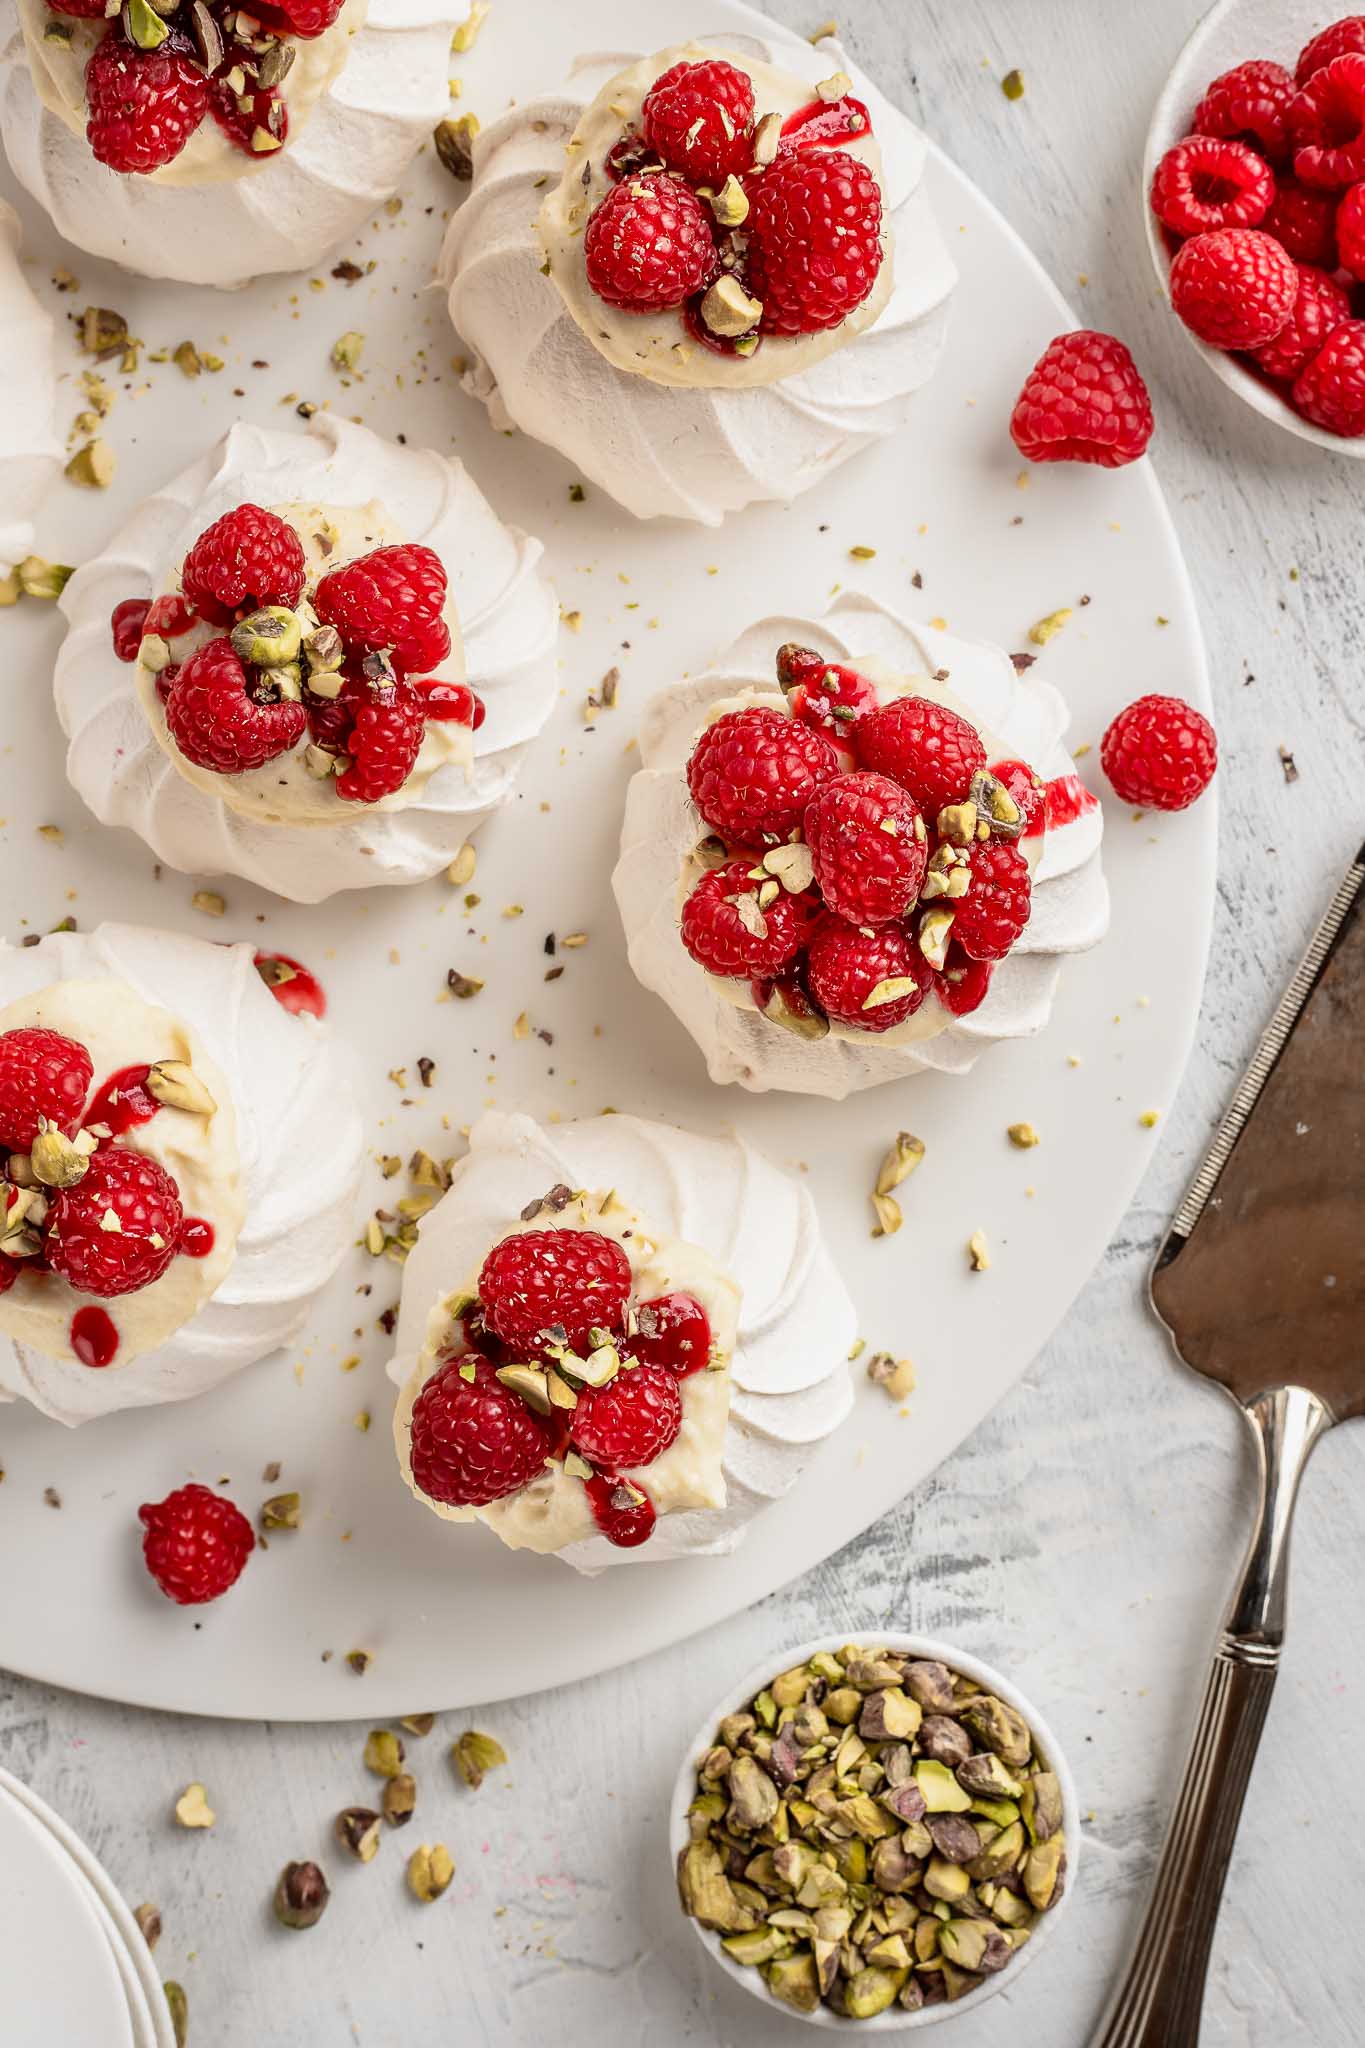 4 mini pavlovas decorated with raspberries and pistachios